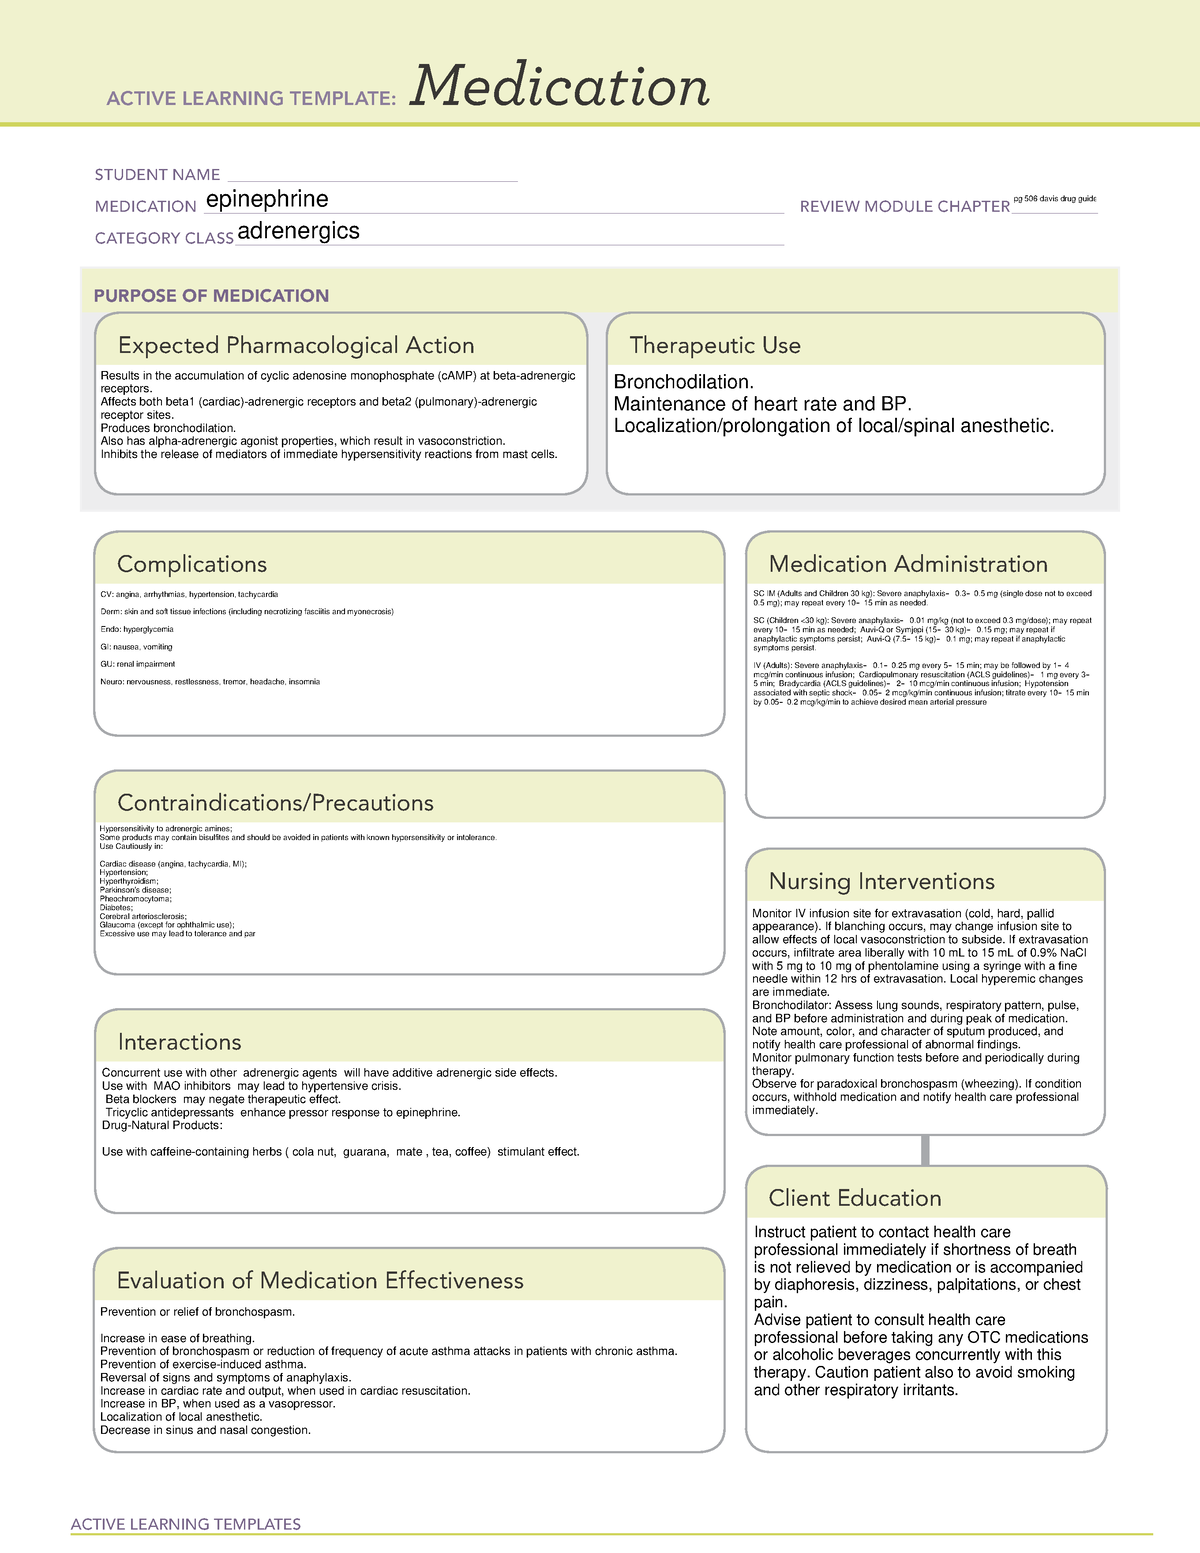 Epinephrine med template ACTIVE LEARNING TEMPLATES Medication